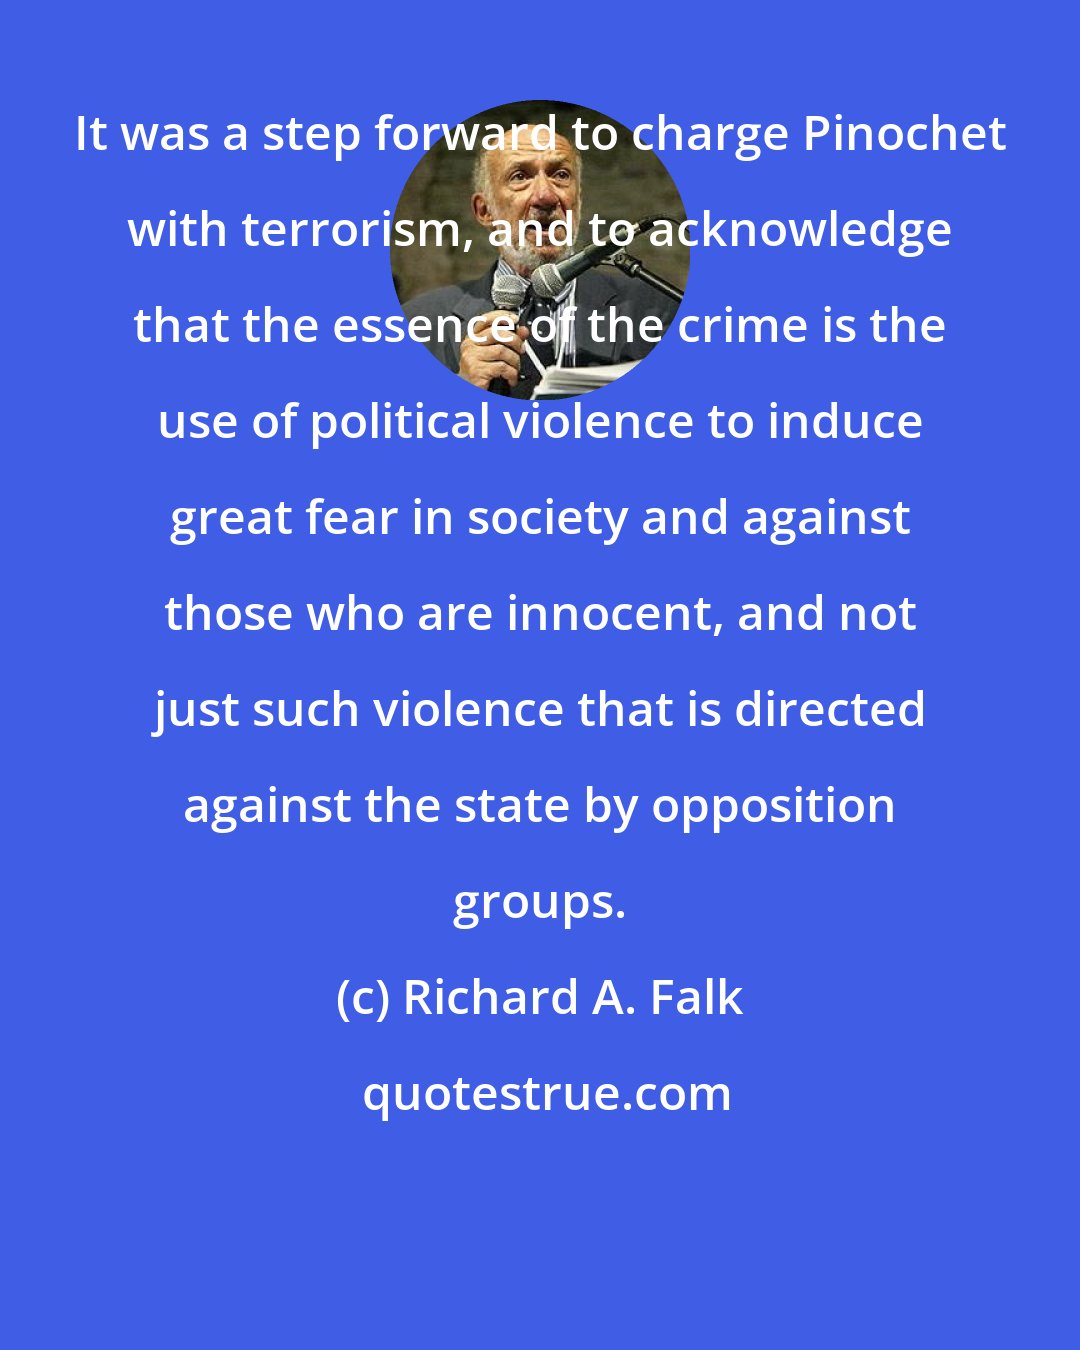 Richard A. Falk: It was a step forward to charge Pinochet with terrorism, and to acknowledge that the essence of the crime is the use of political violence to induce great fear in society and against those who are innocent, and not just such violence that is directed against the state by opposition groups.